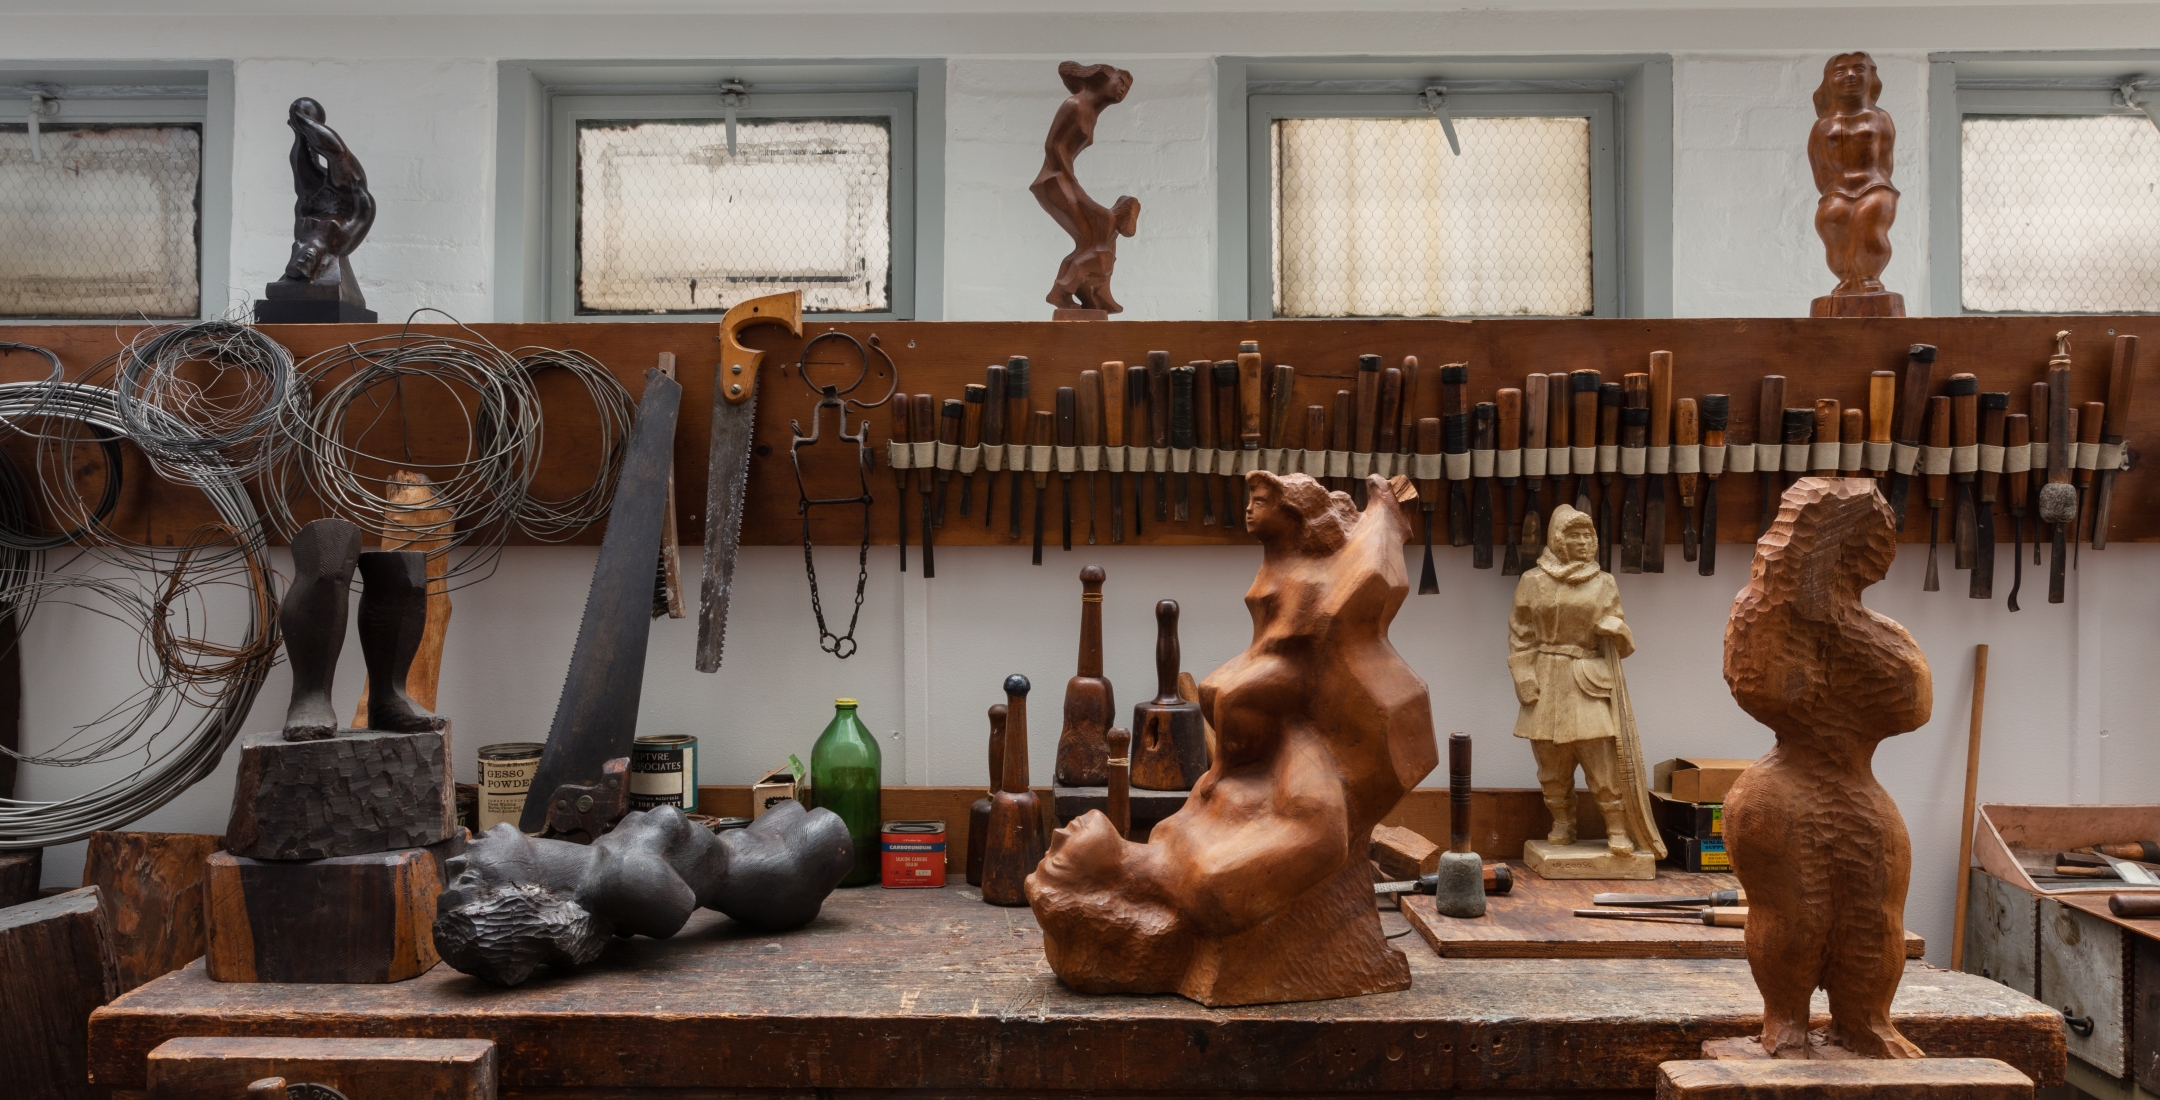 Photo of Chaim Gross' workbench. In the background there is a row of sculpting tools, wires, and small sculptures. In the foreground, on the workbench, there are a few larger wooden sculptures of the human figure.